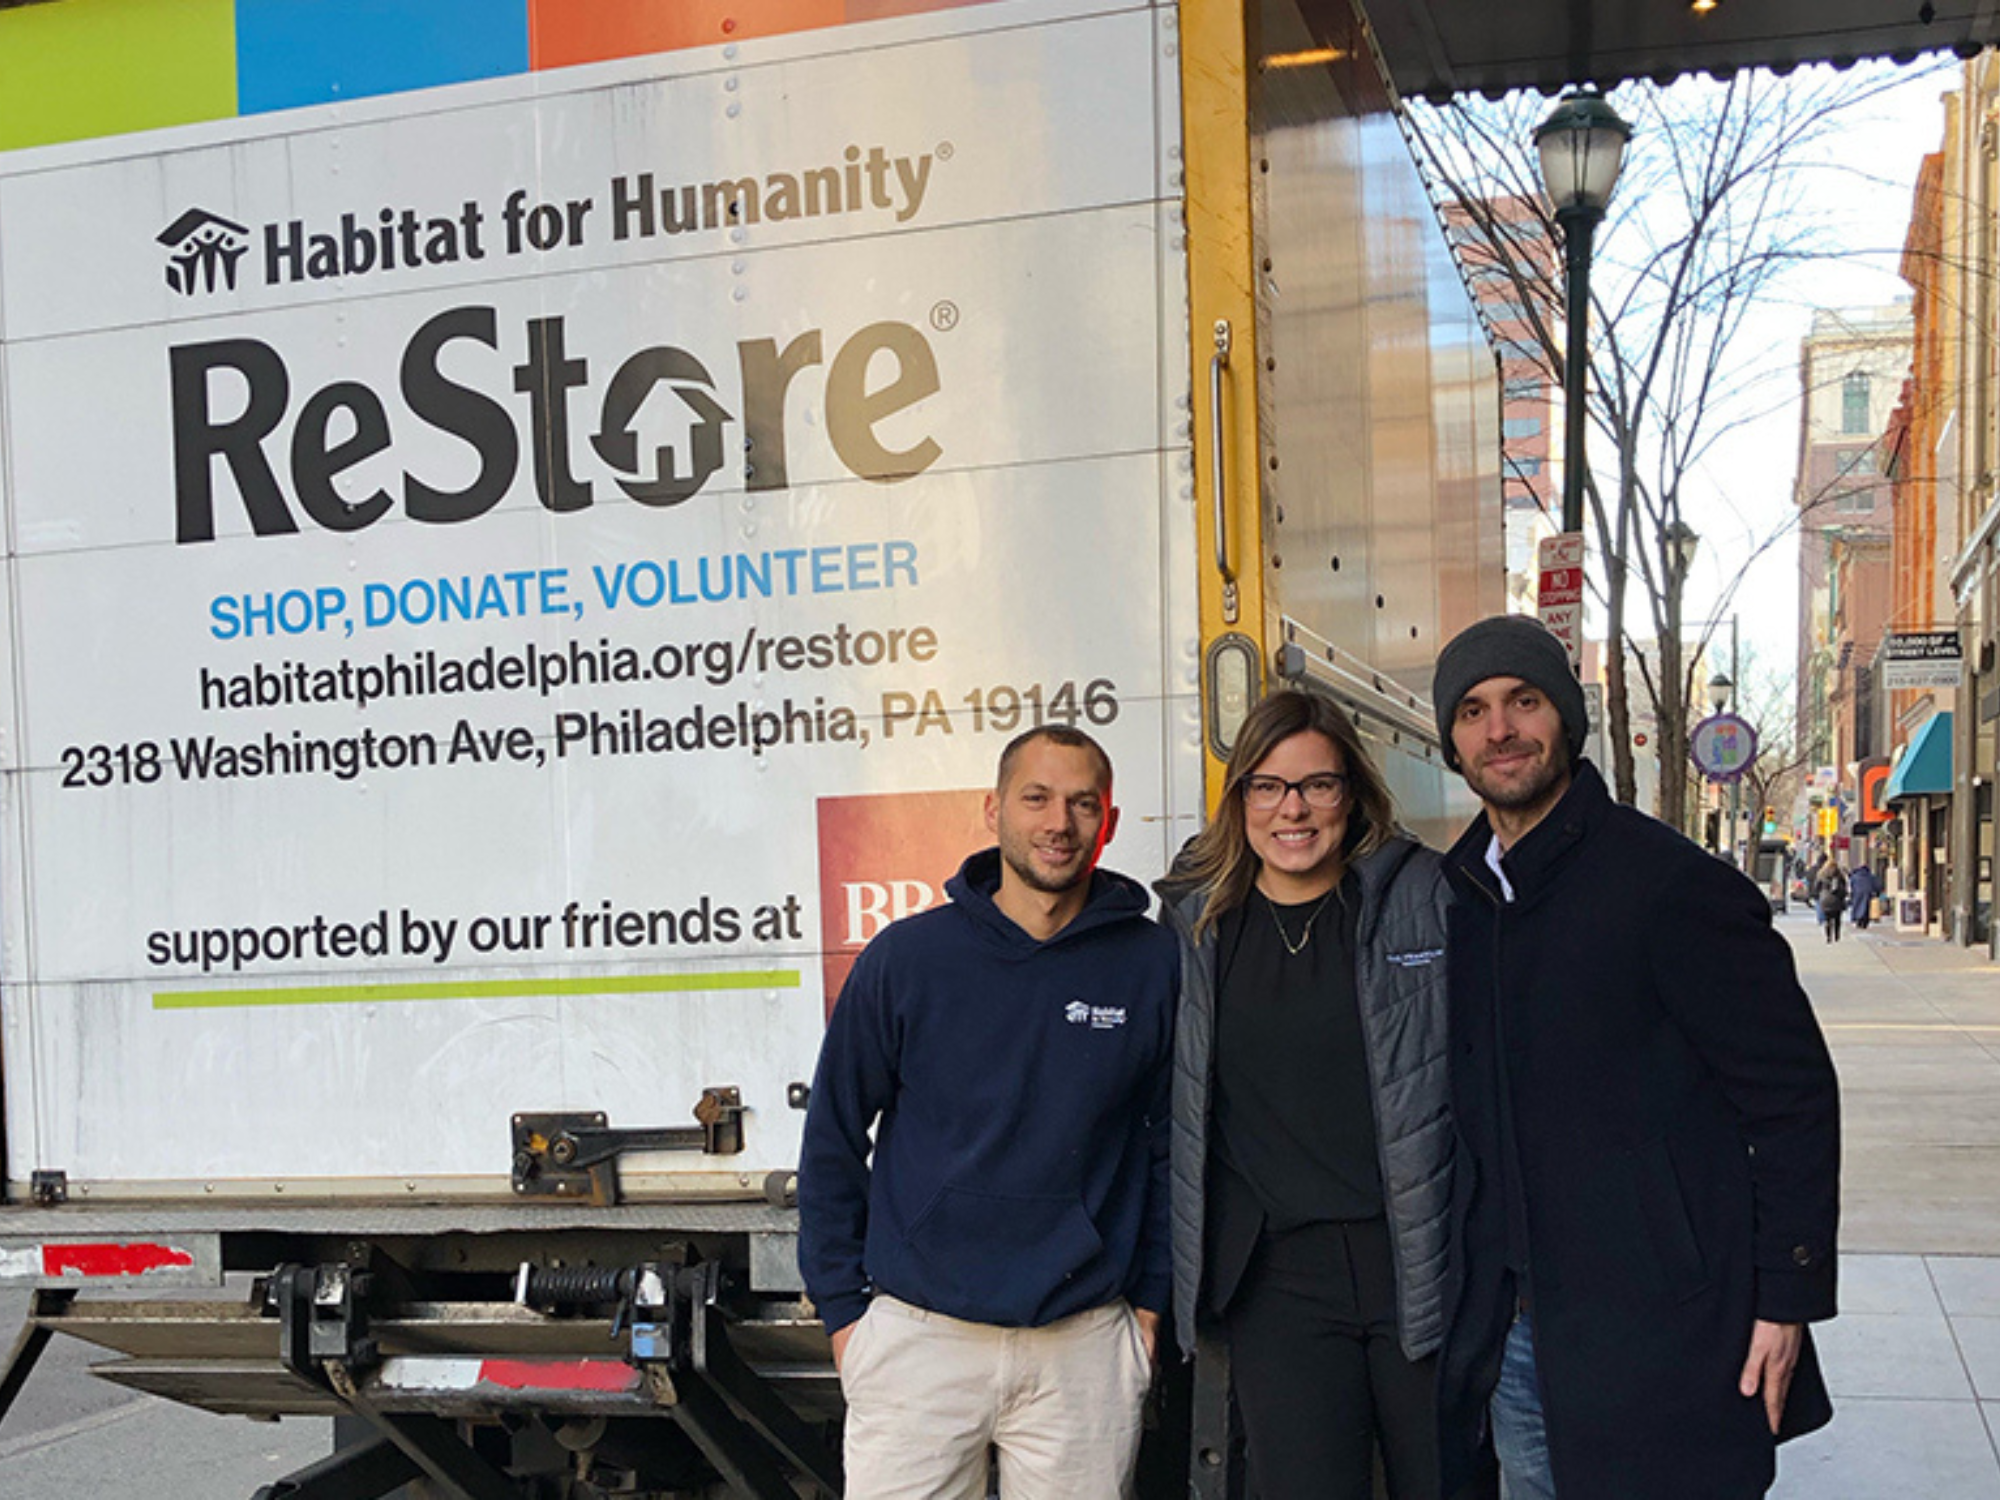 THE FRANKLIN RESIDENCES DONATED 50 SUITES OF FURNISHINGS TO HABITAT FOR HUMANITY PHILADELPHIA